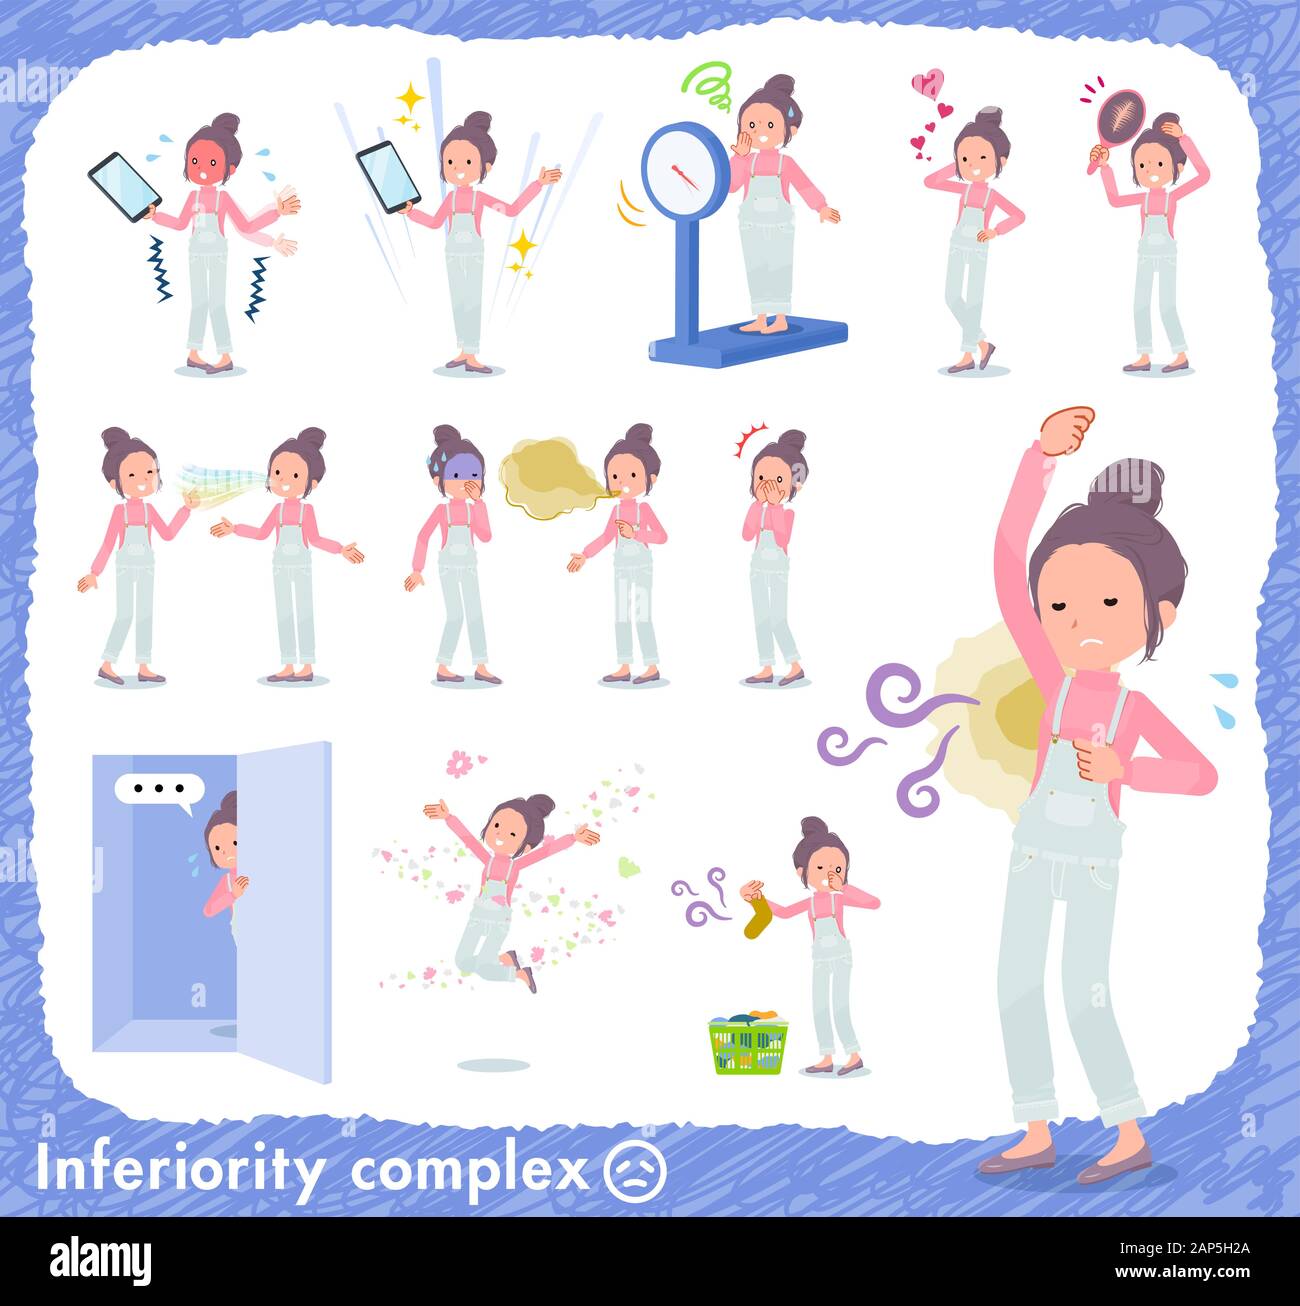 A set of women on inferiority complex.There are actions suffering from smell and appearance.It's vector art so it's easy to edit. Stock Vector